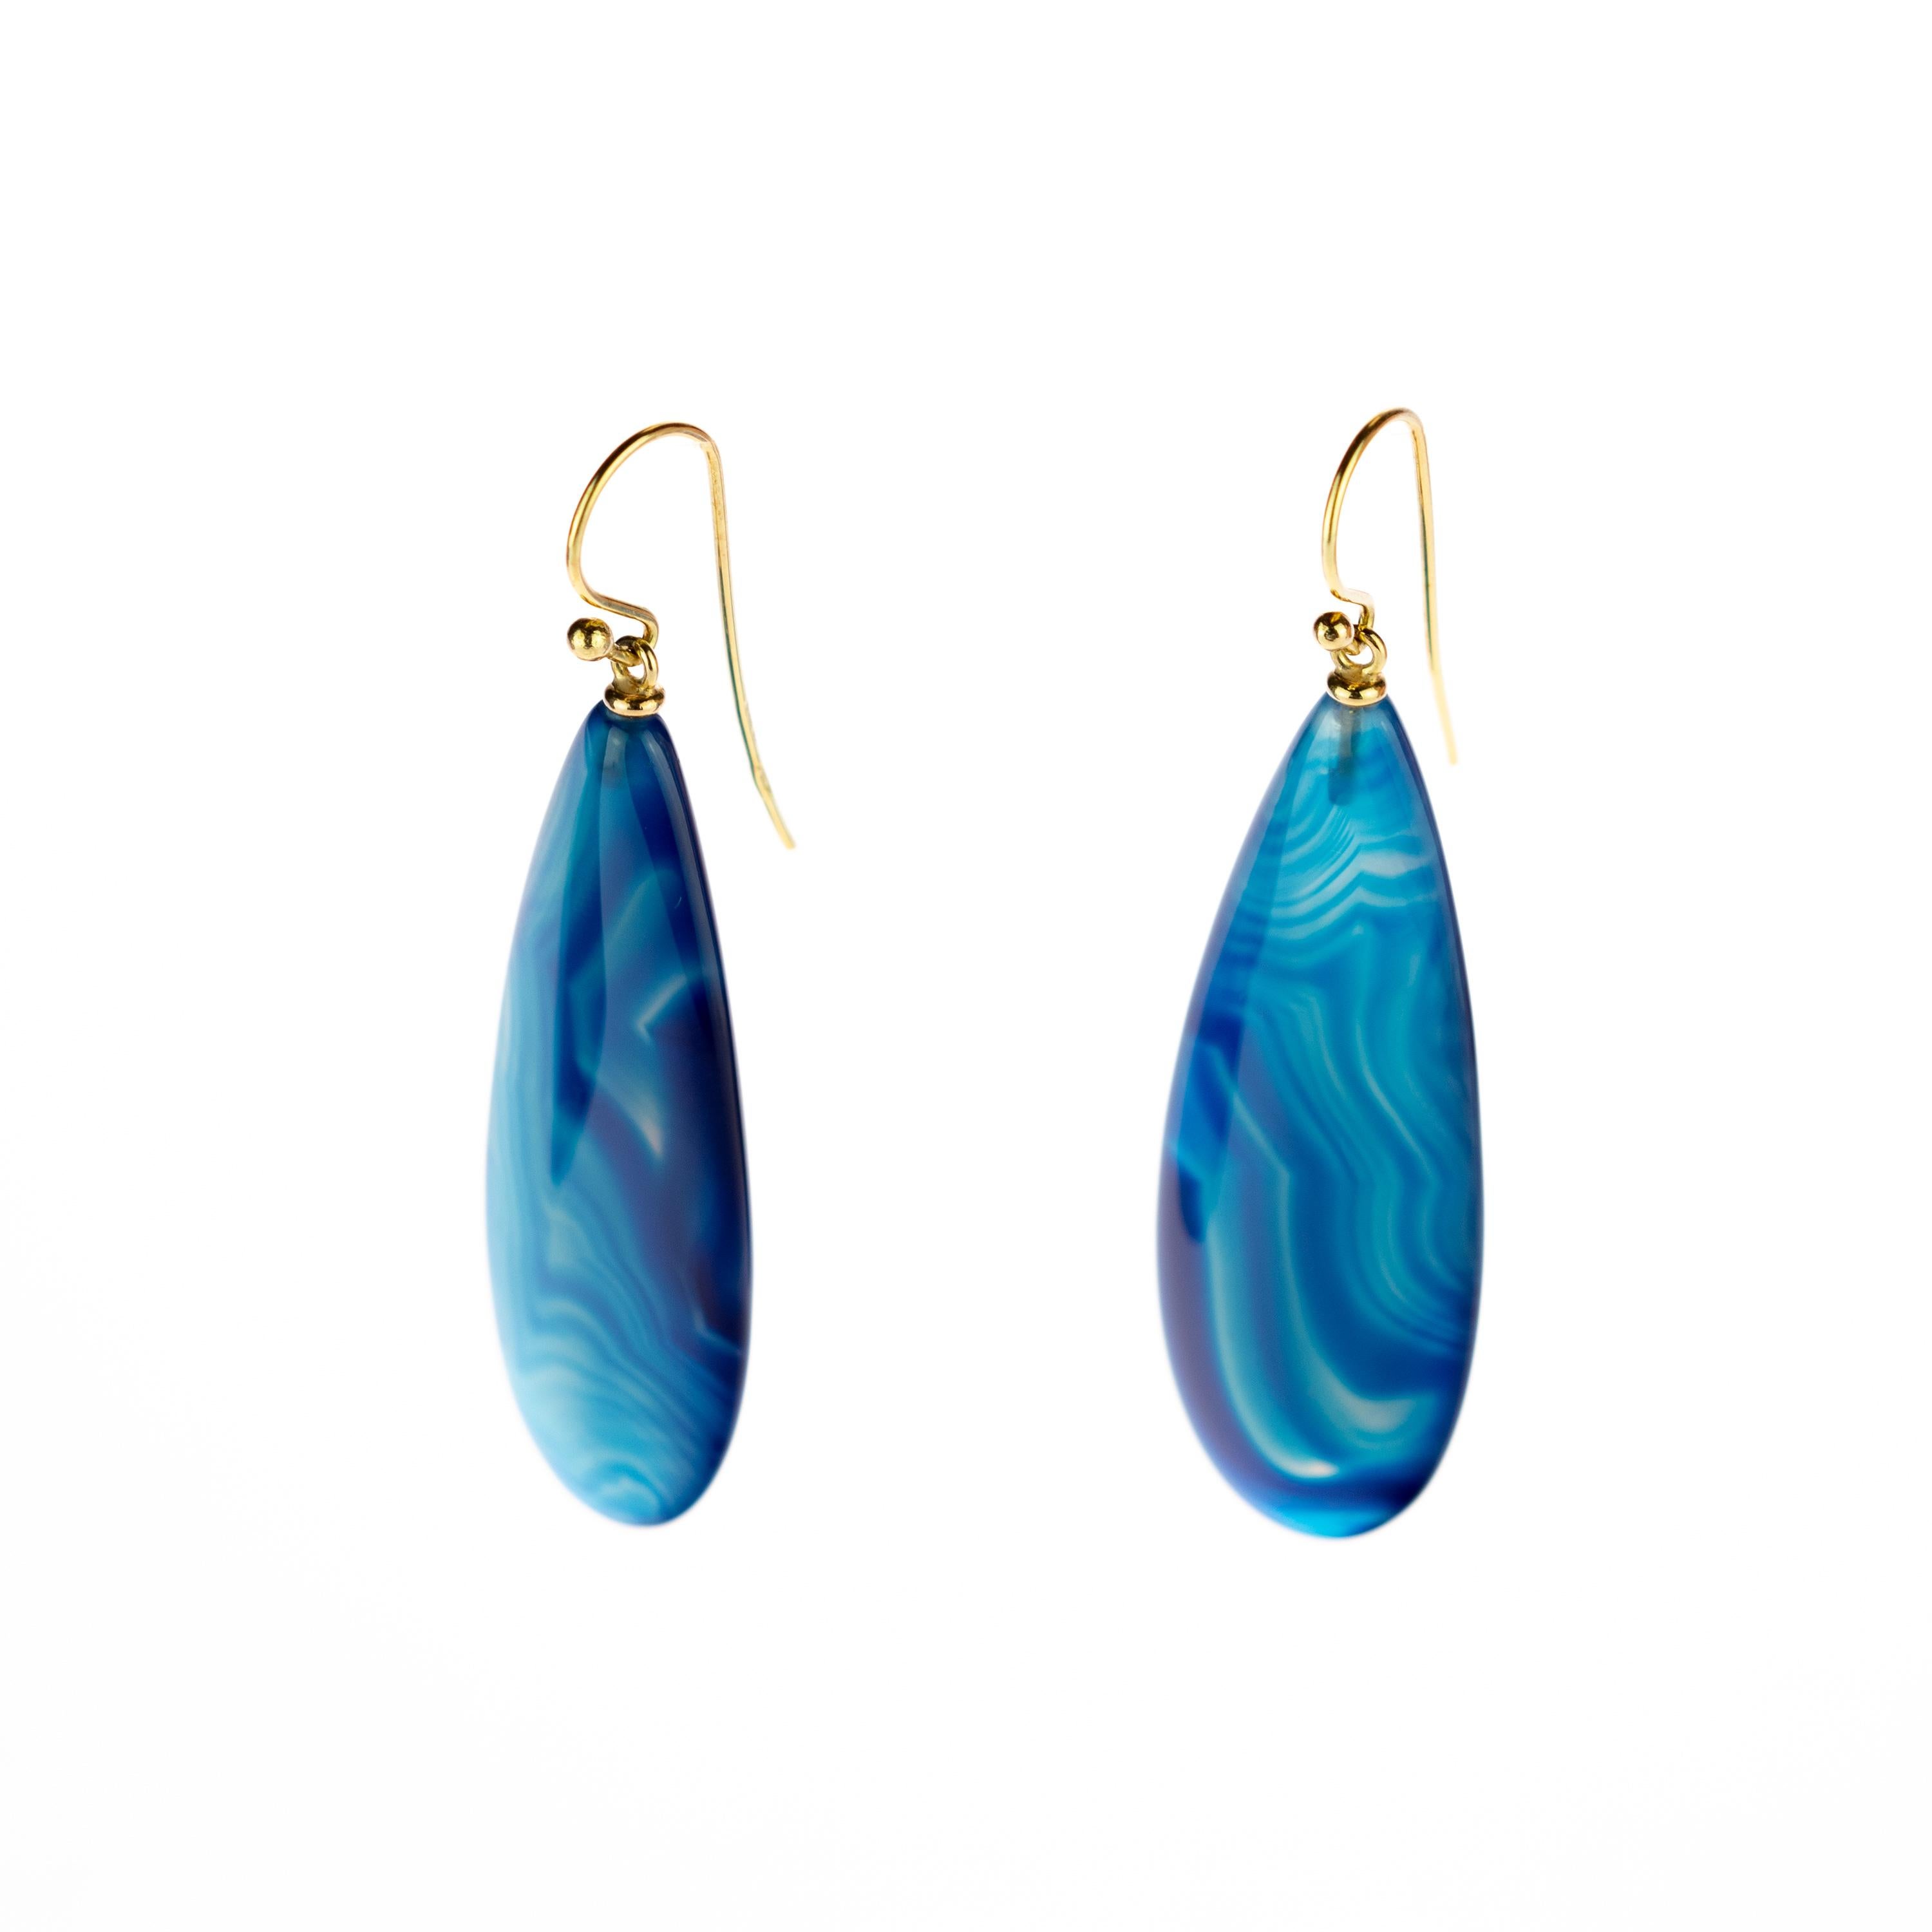 Dreamy hook gradient blue lace agate earrings, embellished with 18 karat yellow gold in a unique tear-pear shape. Let Intini Jewels, our traditional Milanese brand, surprise you with fashionable accessories and make all your jewellery dreams come